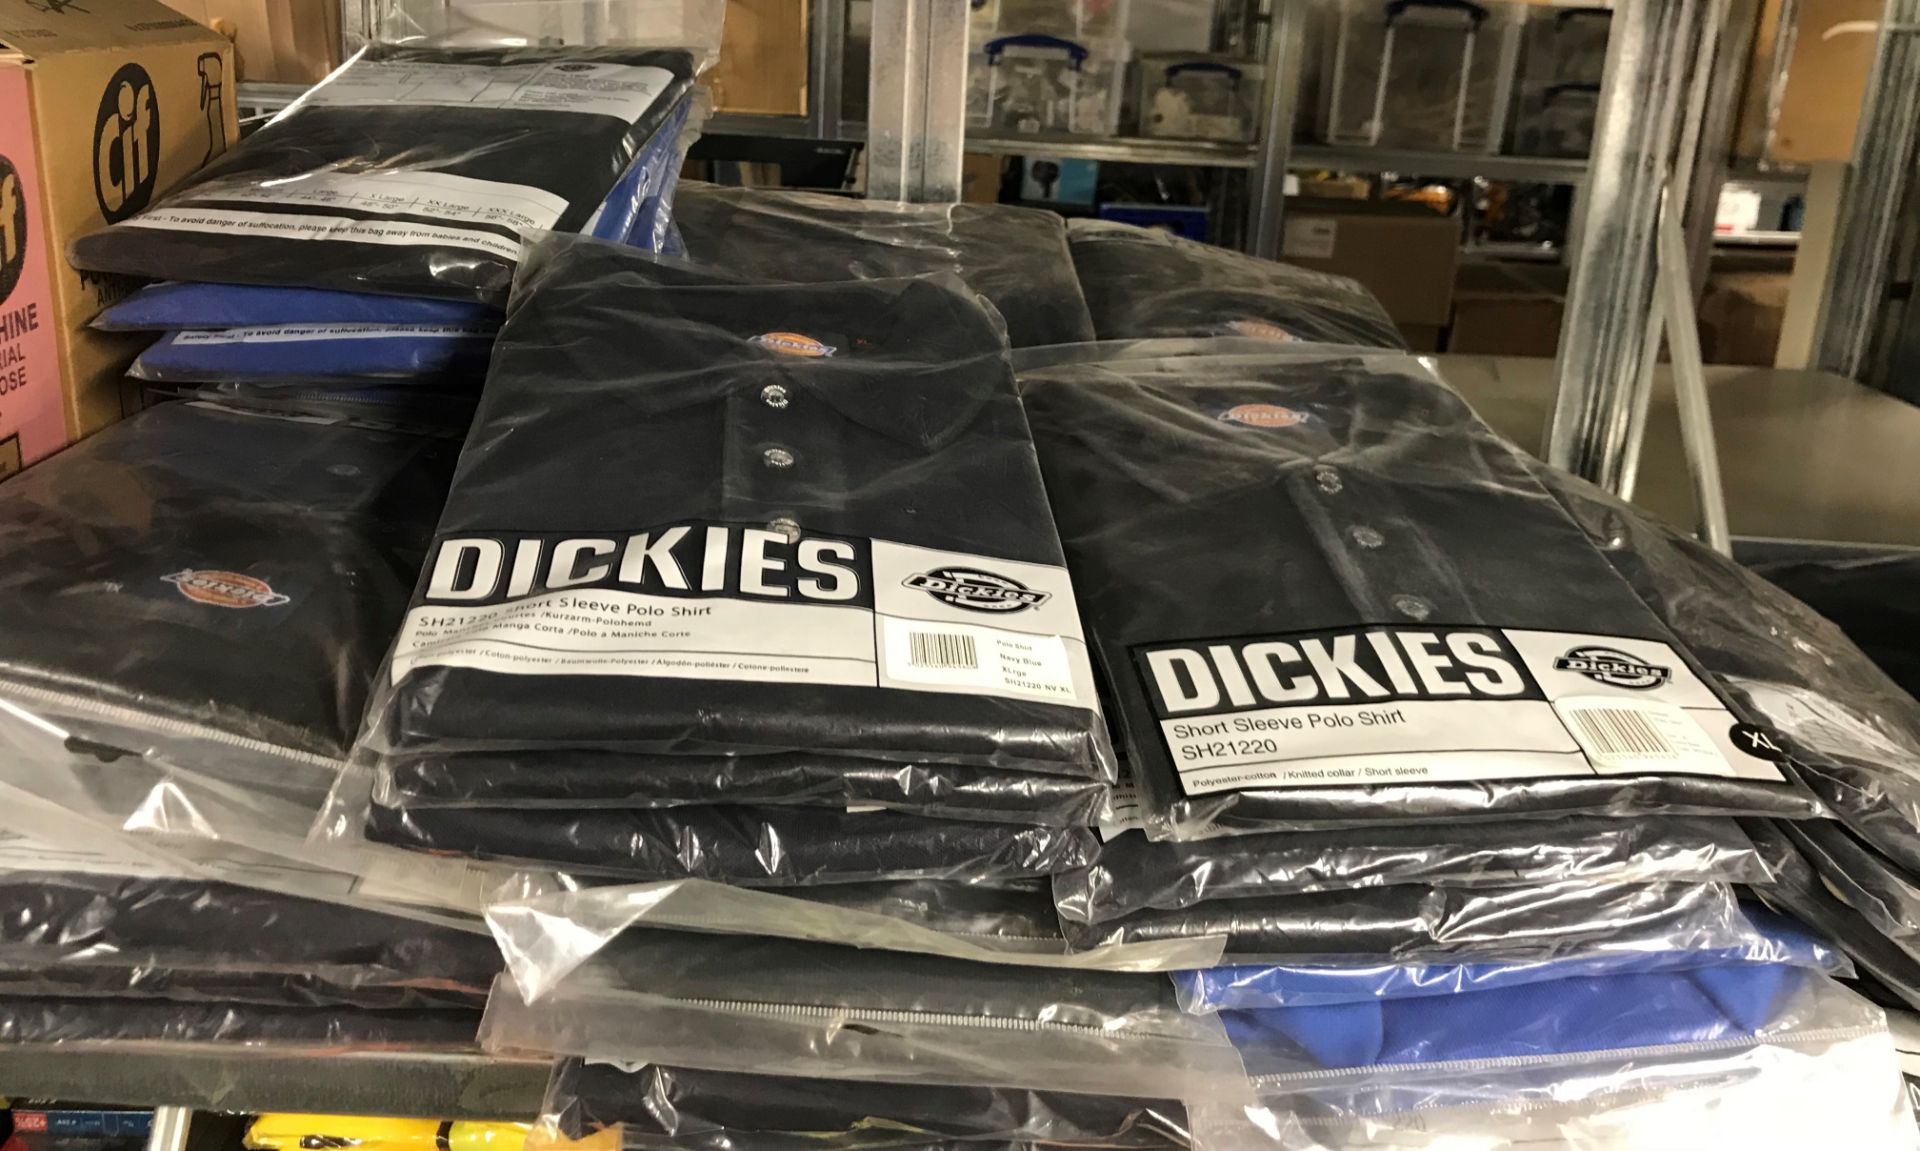 80 x Dickies Polo Shirts, T-shirts & Sweaters - Various Sizes - Colours inc: Navy & Royal Blue - Image 3 of 3